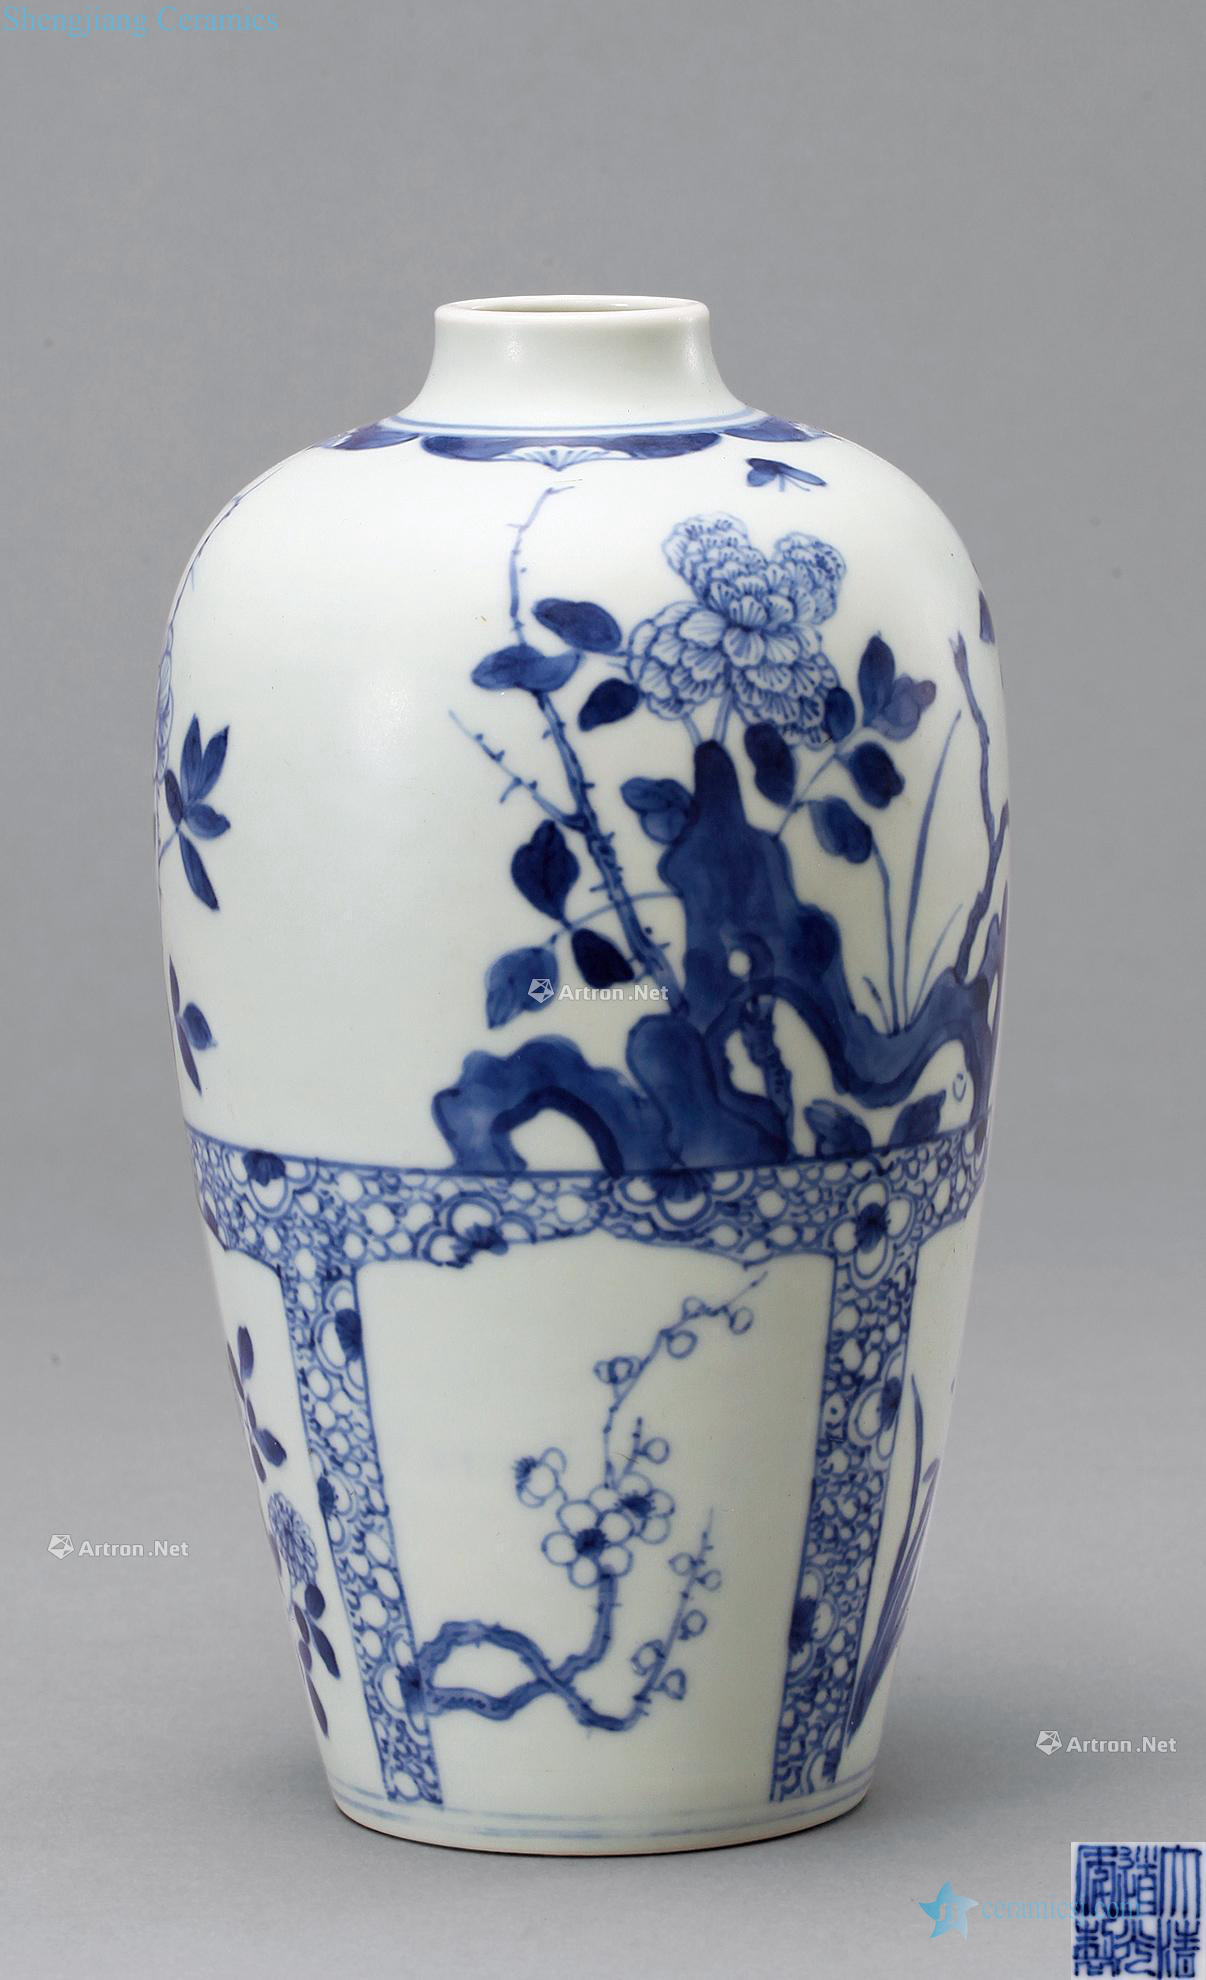 Qing daoguang Blue and white four seasons flower bottle